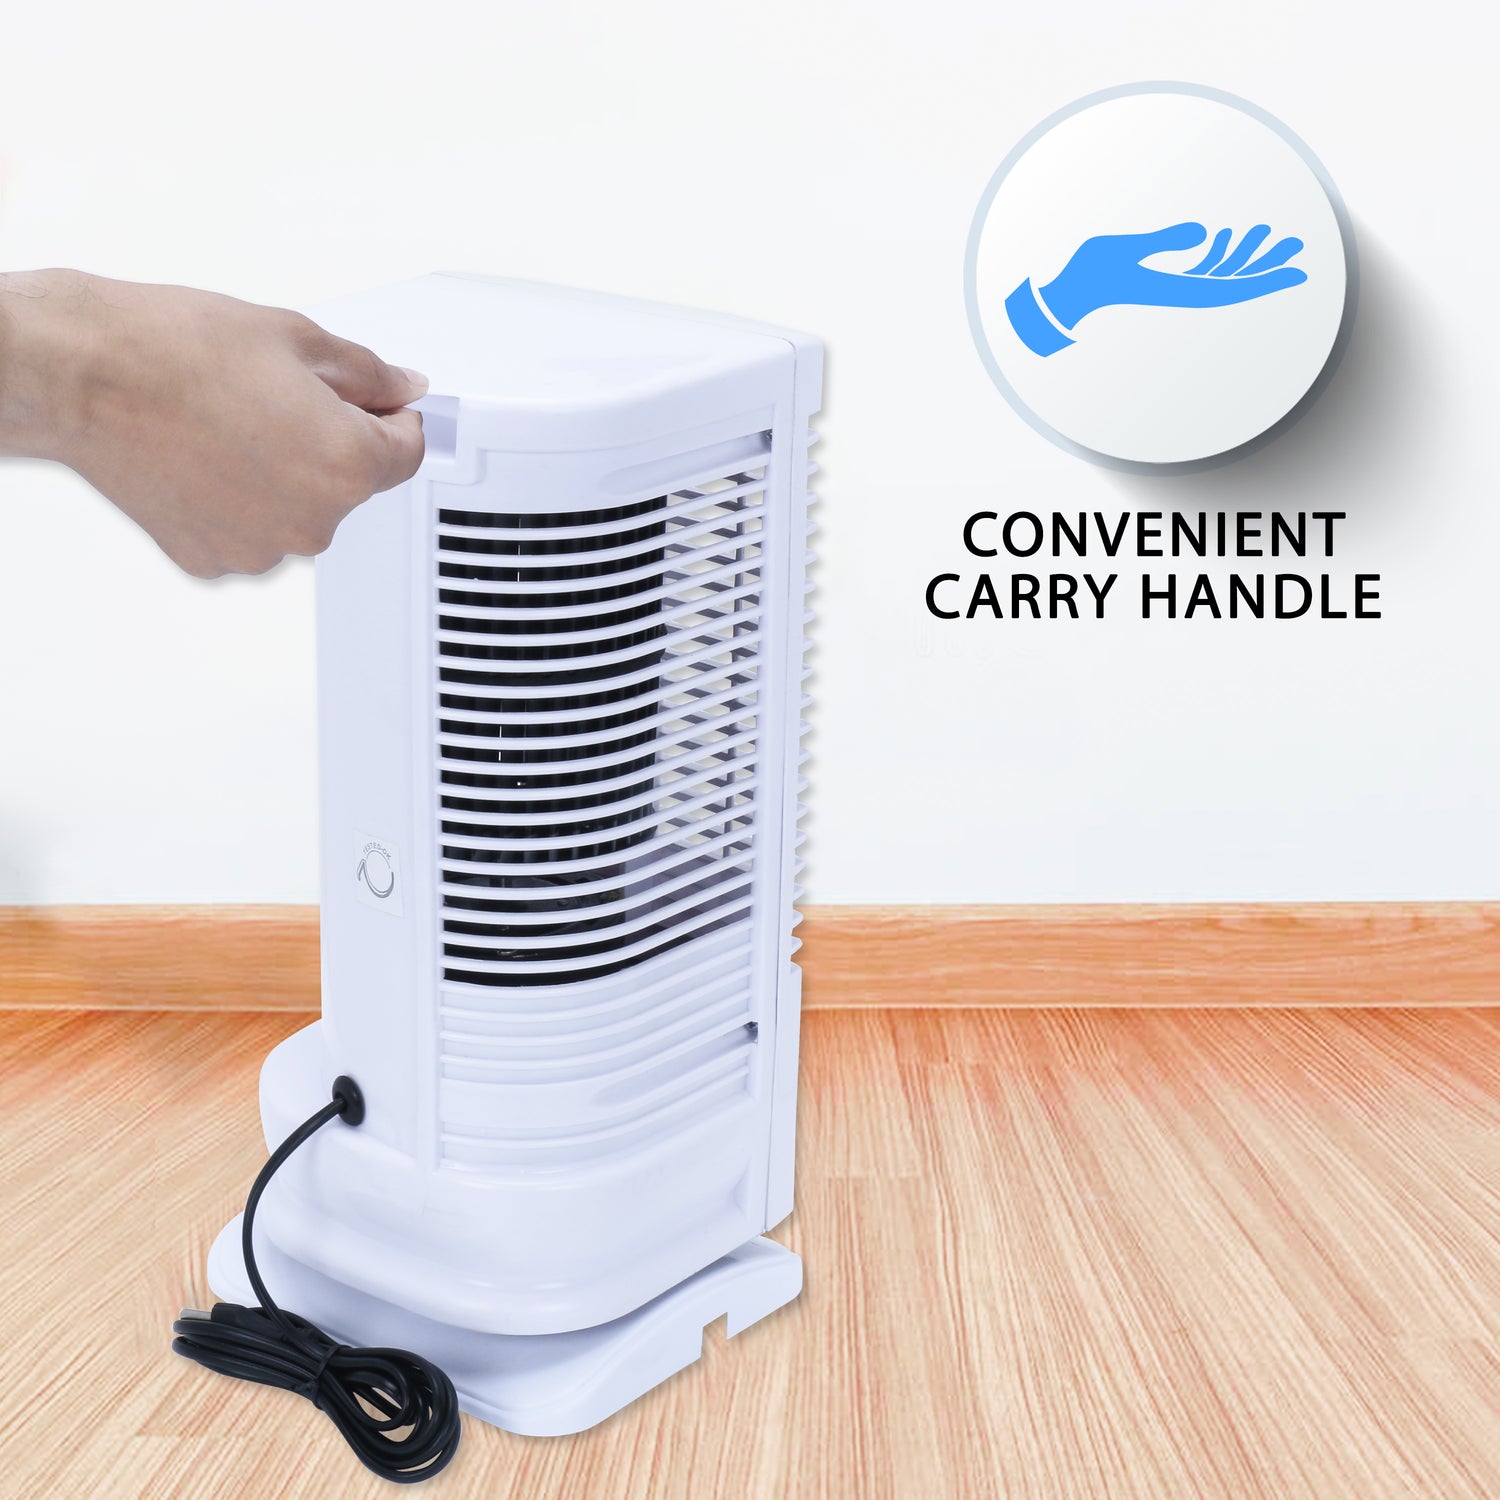 HAVAI Small Tower Fan - White